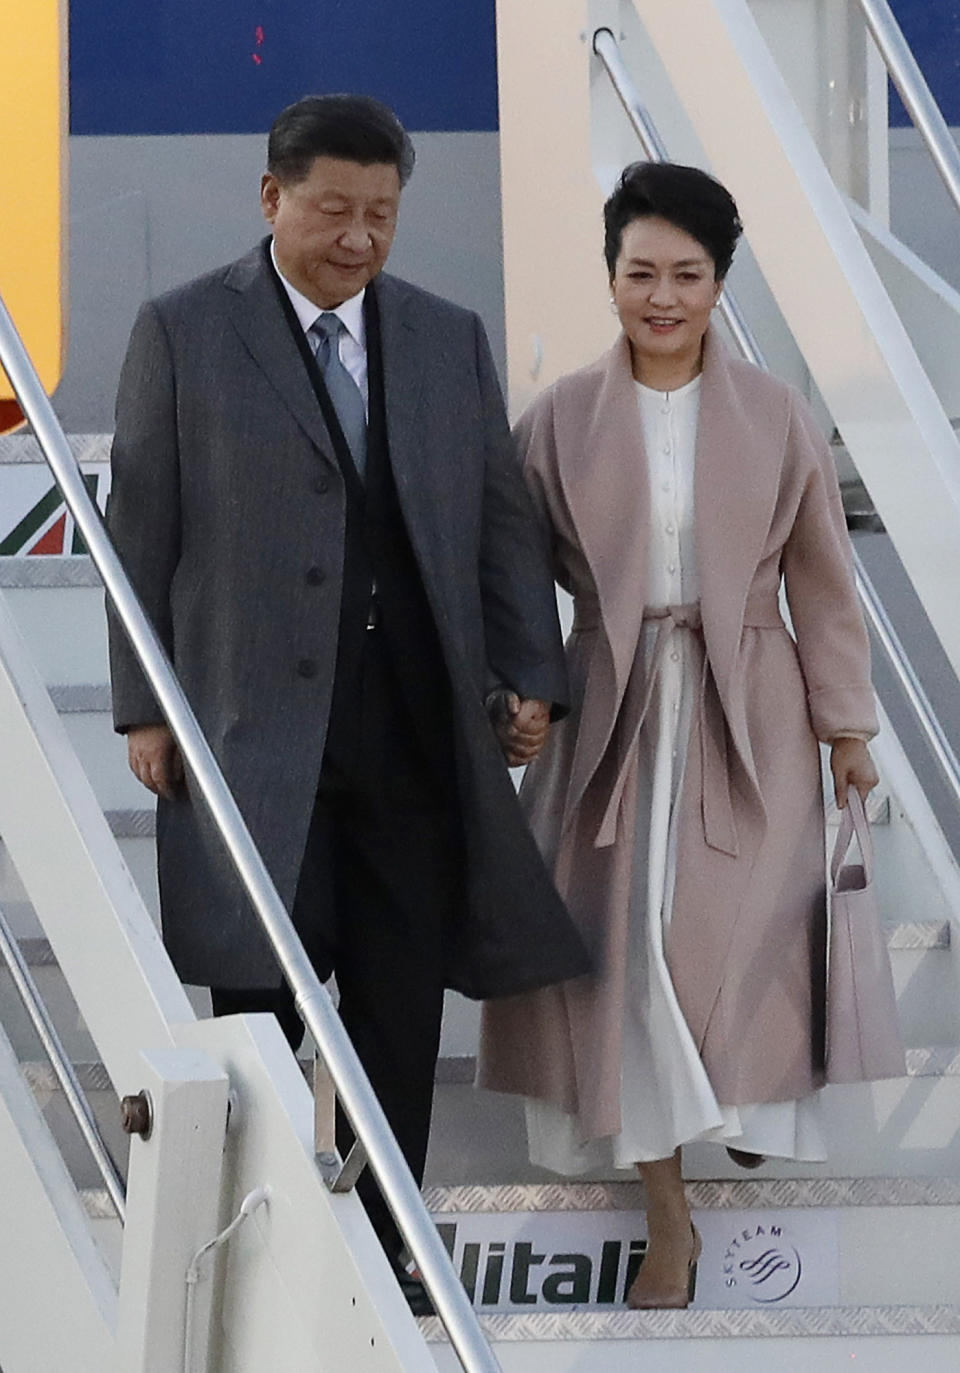 Chinese President Xi Jinping and his wife Peng Liyuan arrive at Rome's Leonardo Da Vinci airport in Fiumicino, Italy, Thursday, March 21, 2019. Jinping is in Italy to sign a memorandum of understanding to make Italy the first Group of Seven leading democracies to join China's ambitious Belt and Road infrastructure project. (AP Photo/Andrew Medichini)